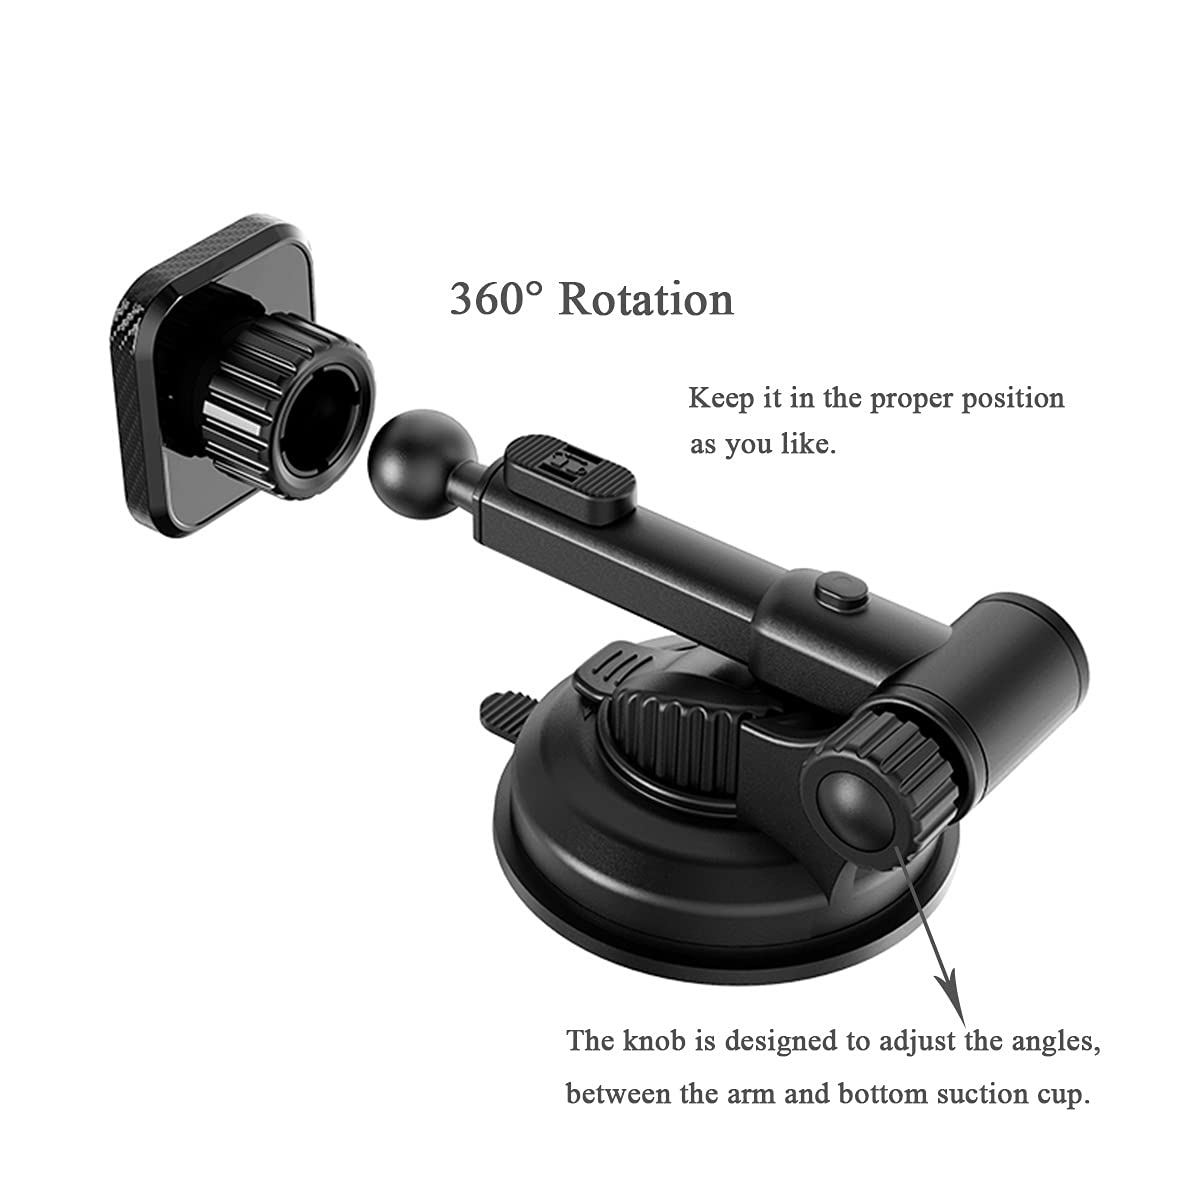 RAKPG Magnetic Car Phone Mount, Universal Cell Phone Holder on Dashboard or Windshield, with Strong Sticky Suction Cup and Multi-Angle Adjustable Arm, Black